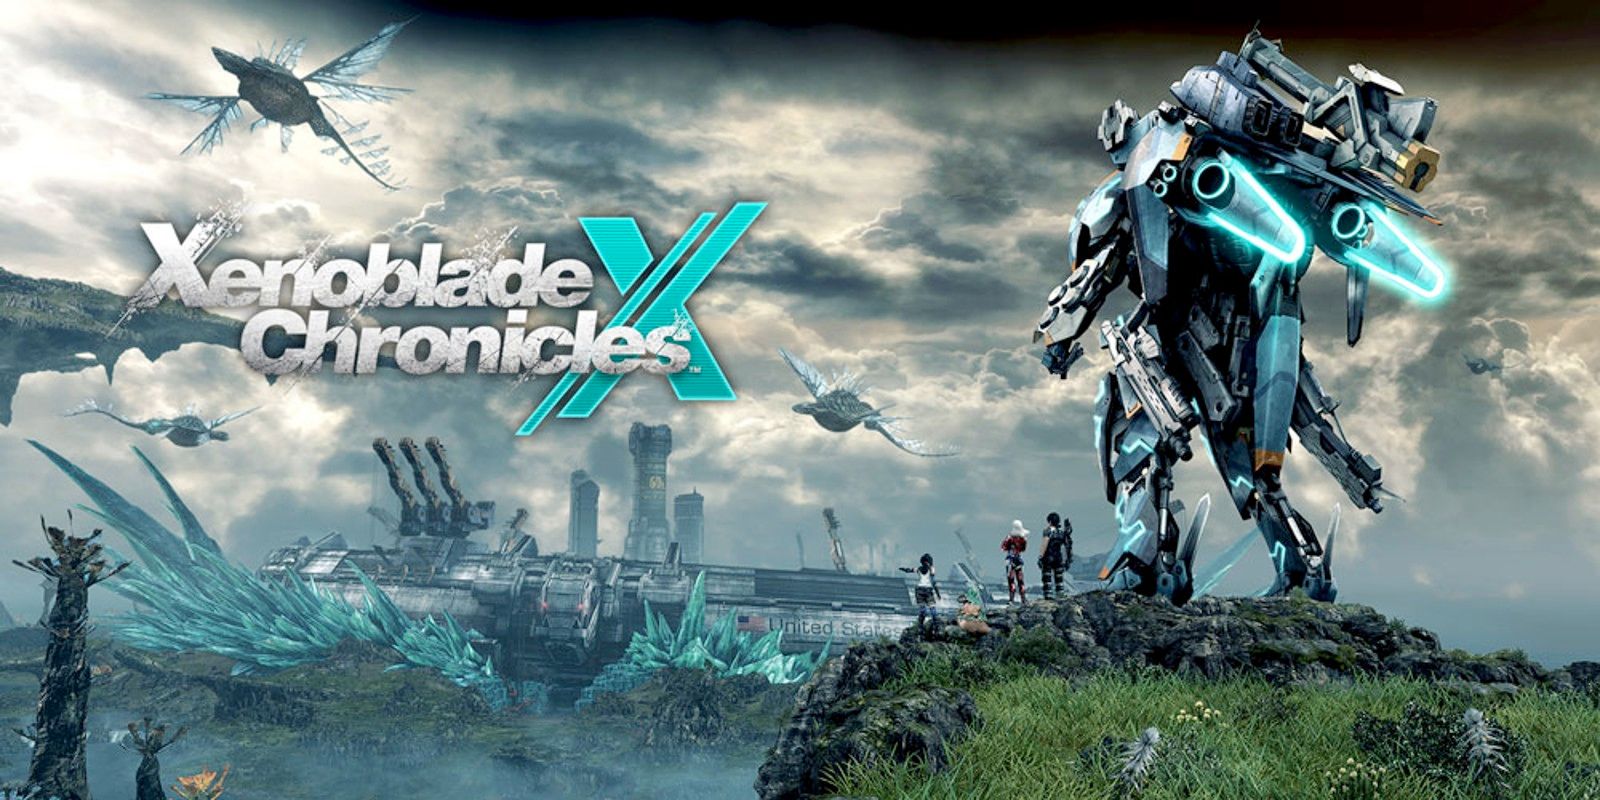 Xenoblade Chronicles X cover art; a mecha overlooks a large strucure.